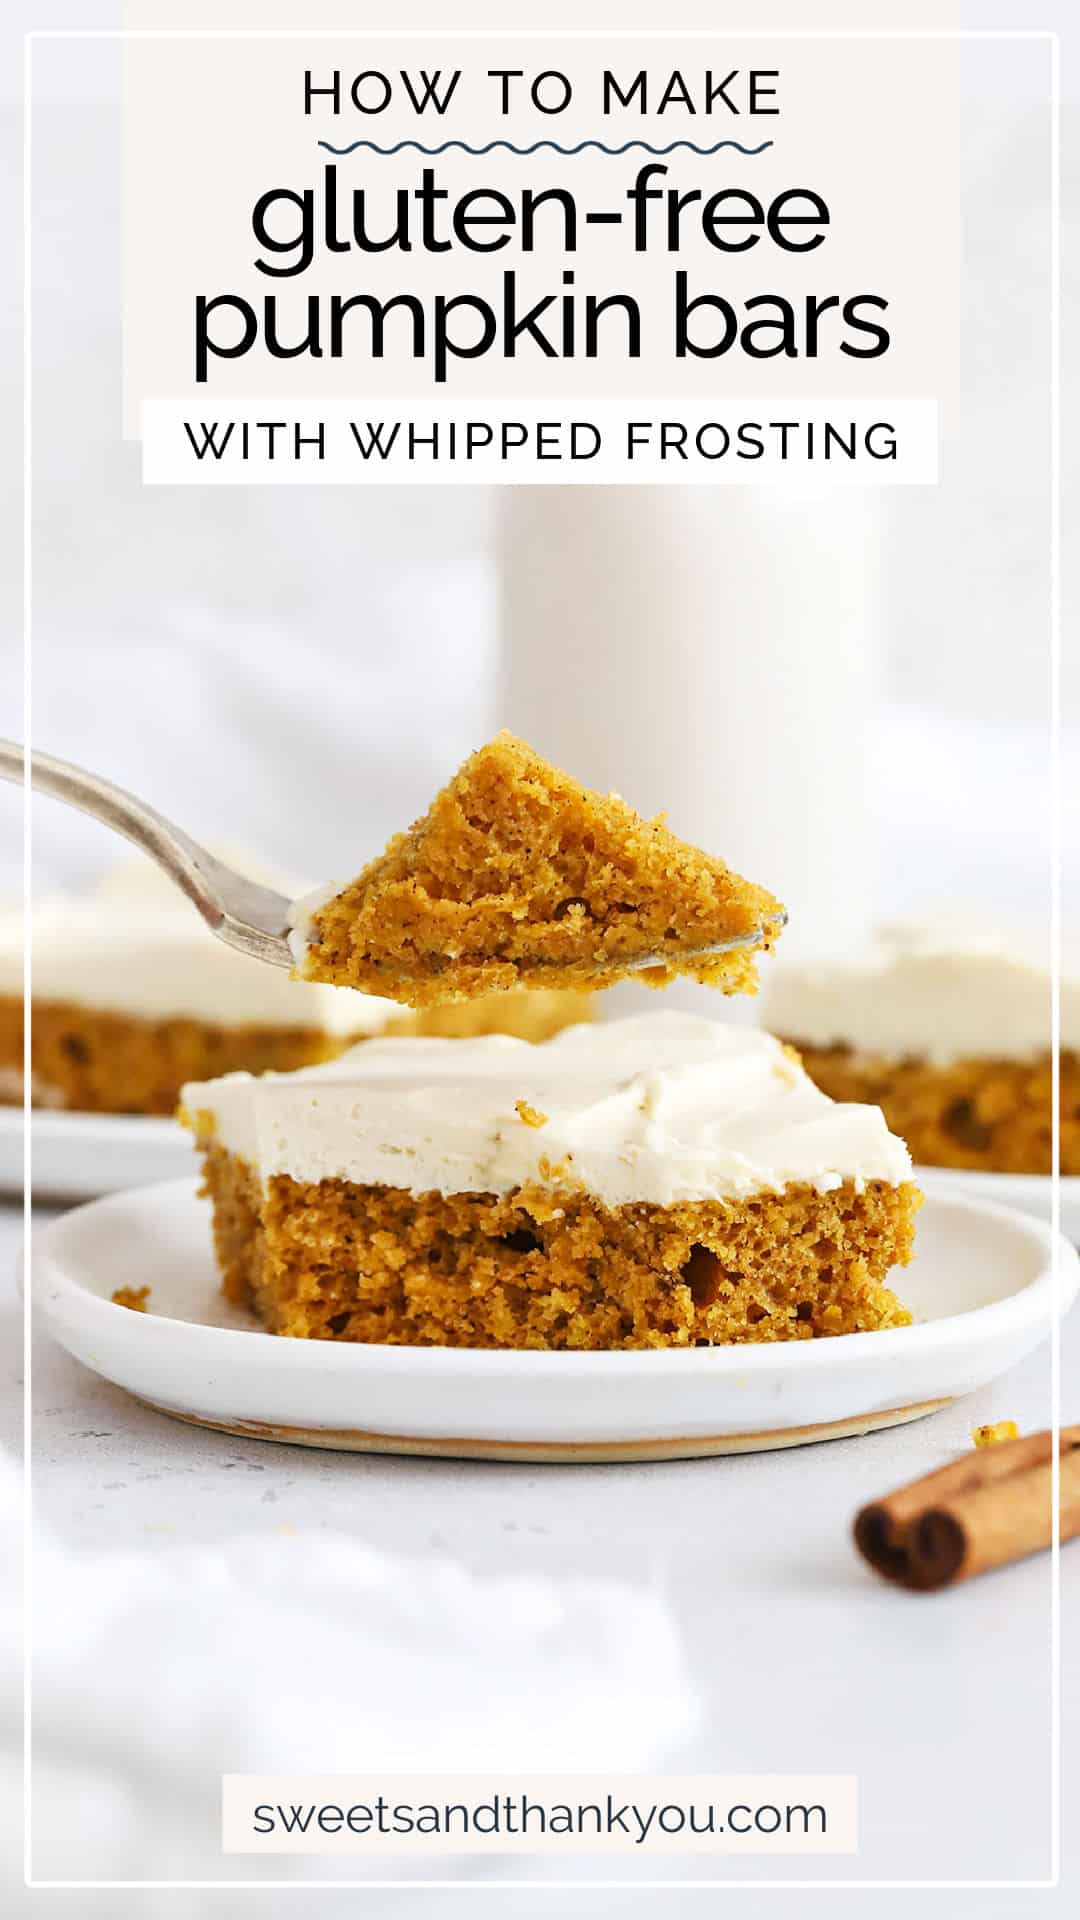 Gluten-Free Pumpkin Bars - This easy gluten-free pumpkin bars recipe is laced with warm spices & topped with a light whipped brown sugar cream cheese frosting that's the perfect finish. // the best gluten-free pumpkin bars // gluten-free pumpkin bar recipe // gluten-free pumpkin bars with cream cheese frosting // whipped cream cheese frosting recipe